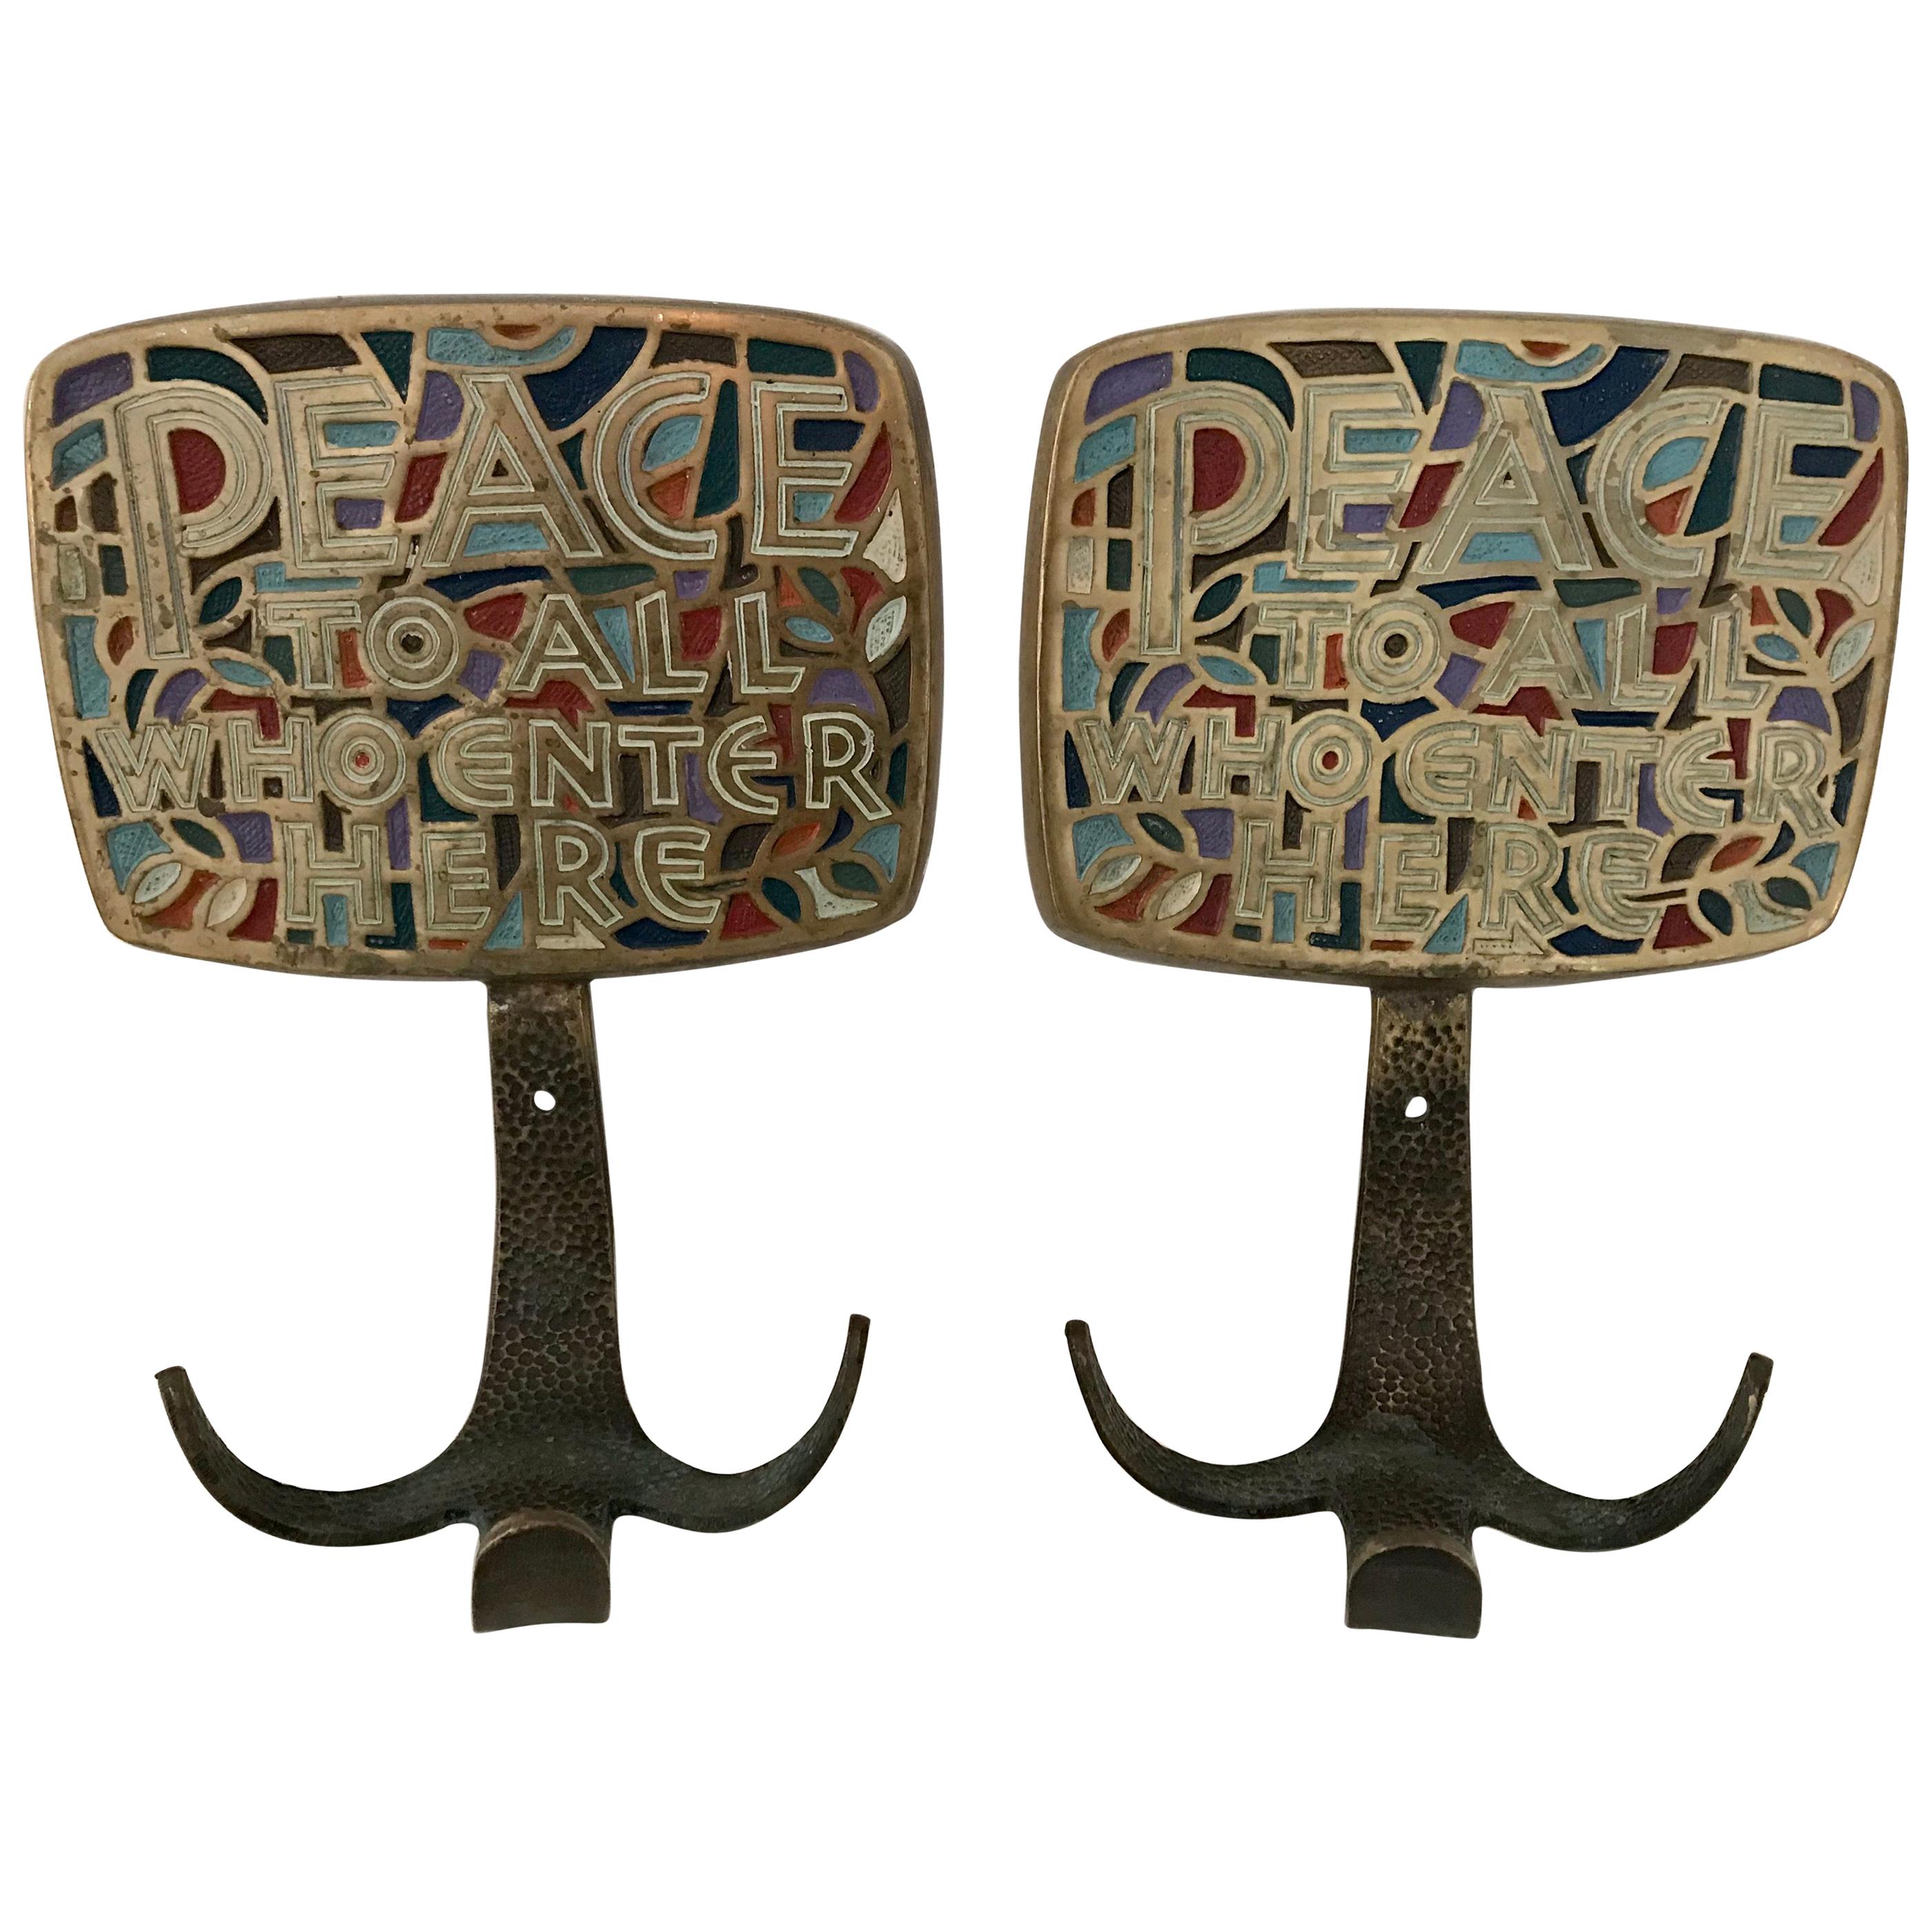 Pair of Mid Century Wall Mount Coat or Hat Racks "Peace to All Who Enter Here"